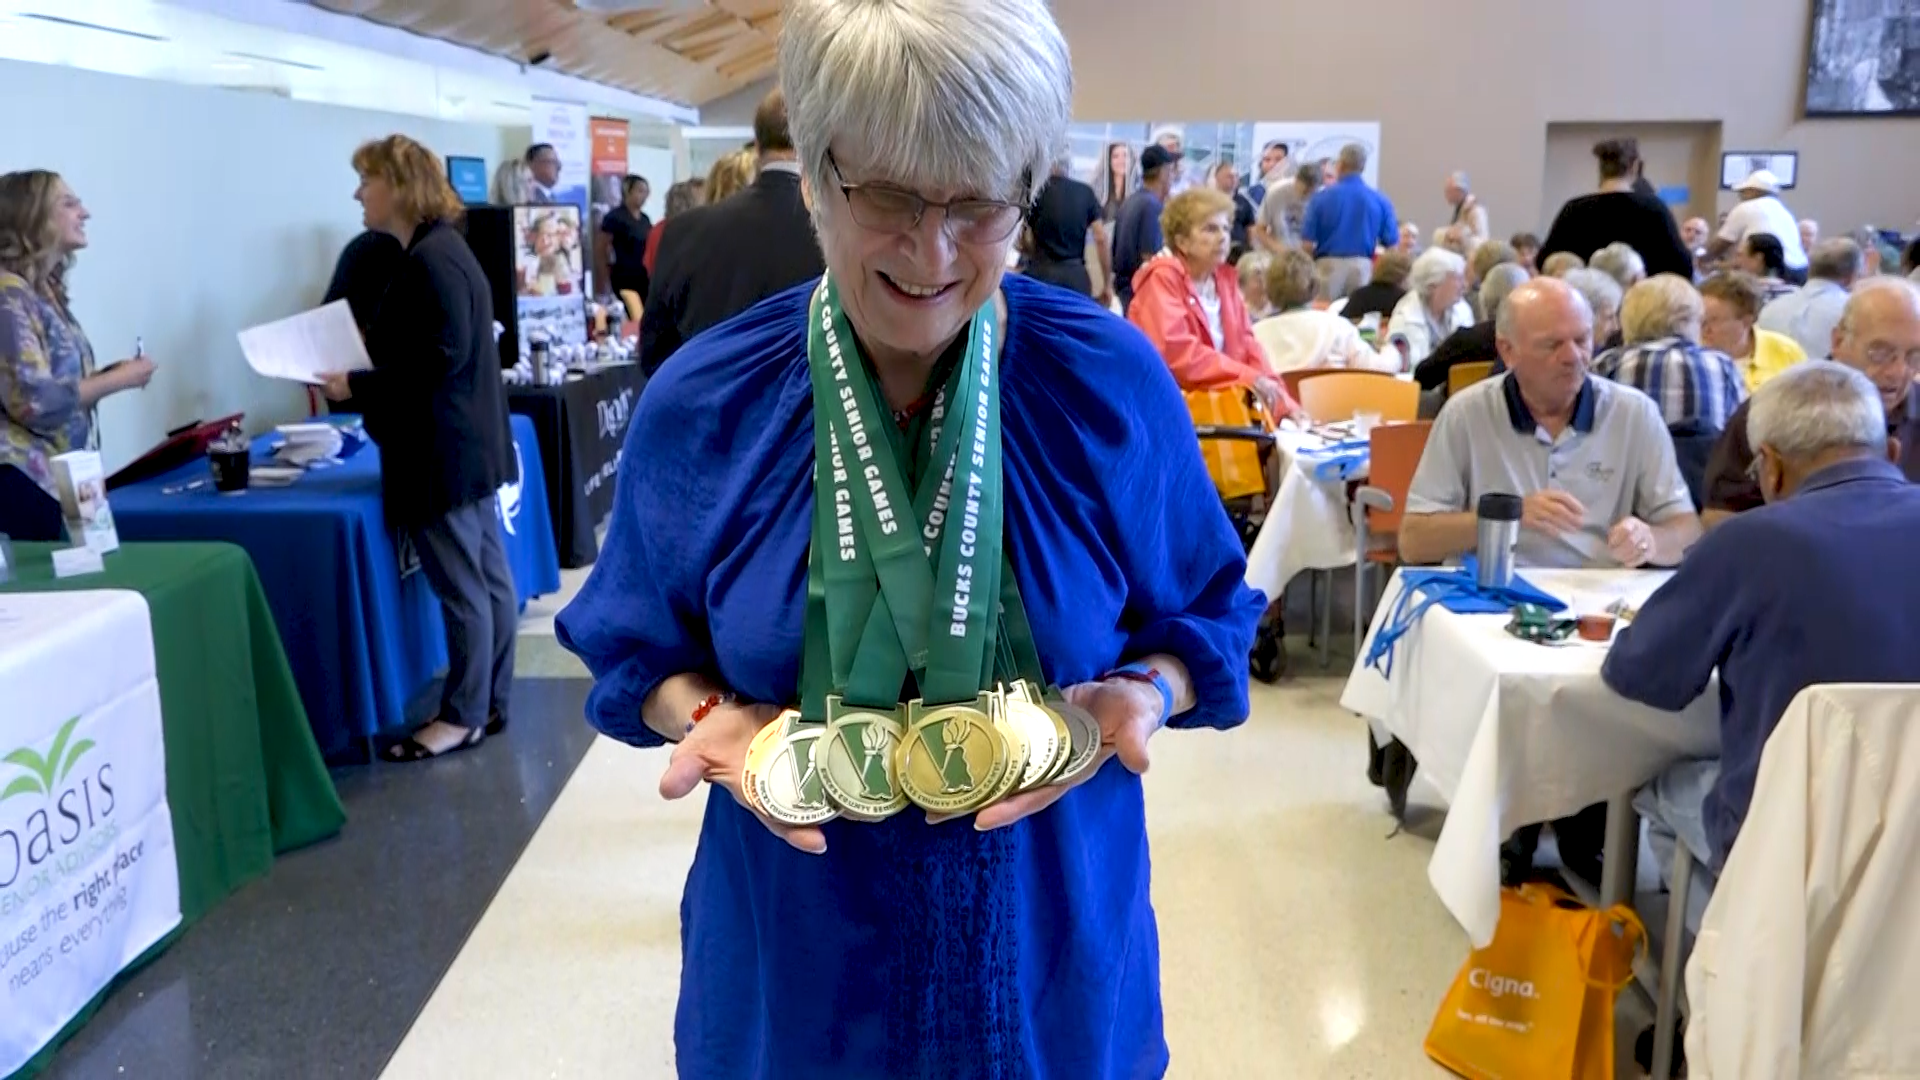 Local Athletes Celebrate Success in the Bucks County Senior Games